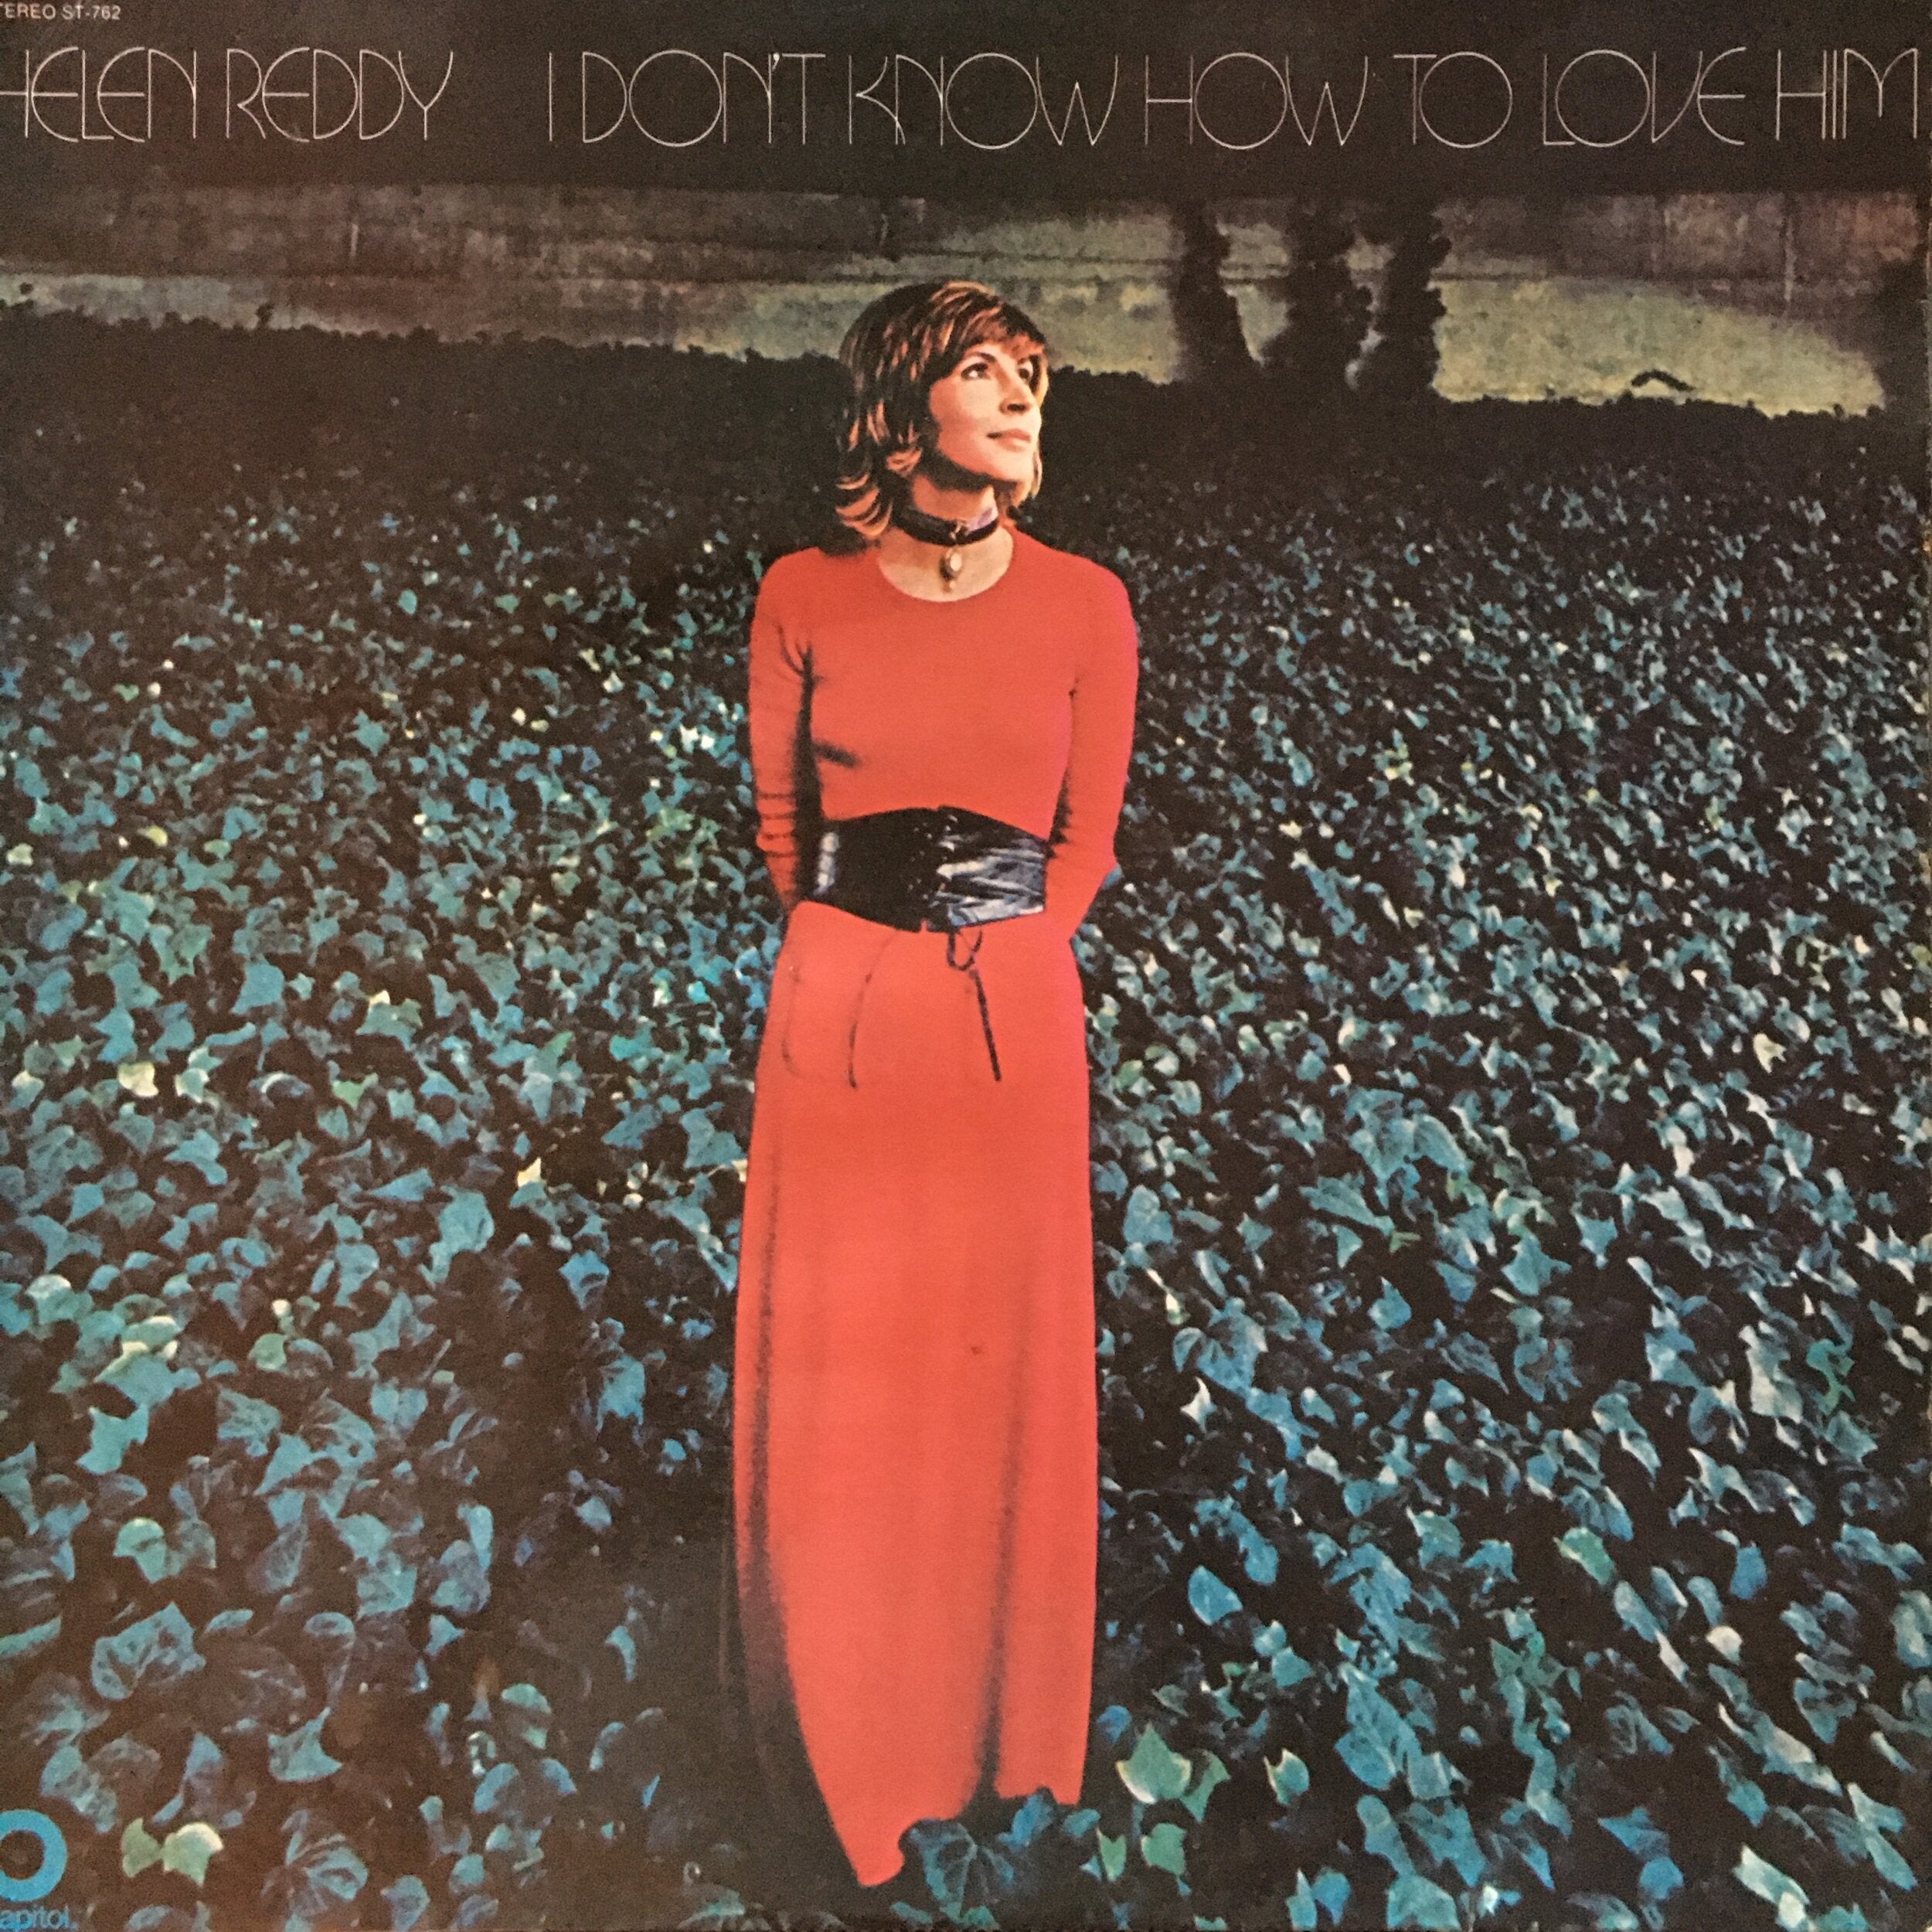 Helen Reddy ‎| I Don't Know How To Love Him